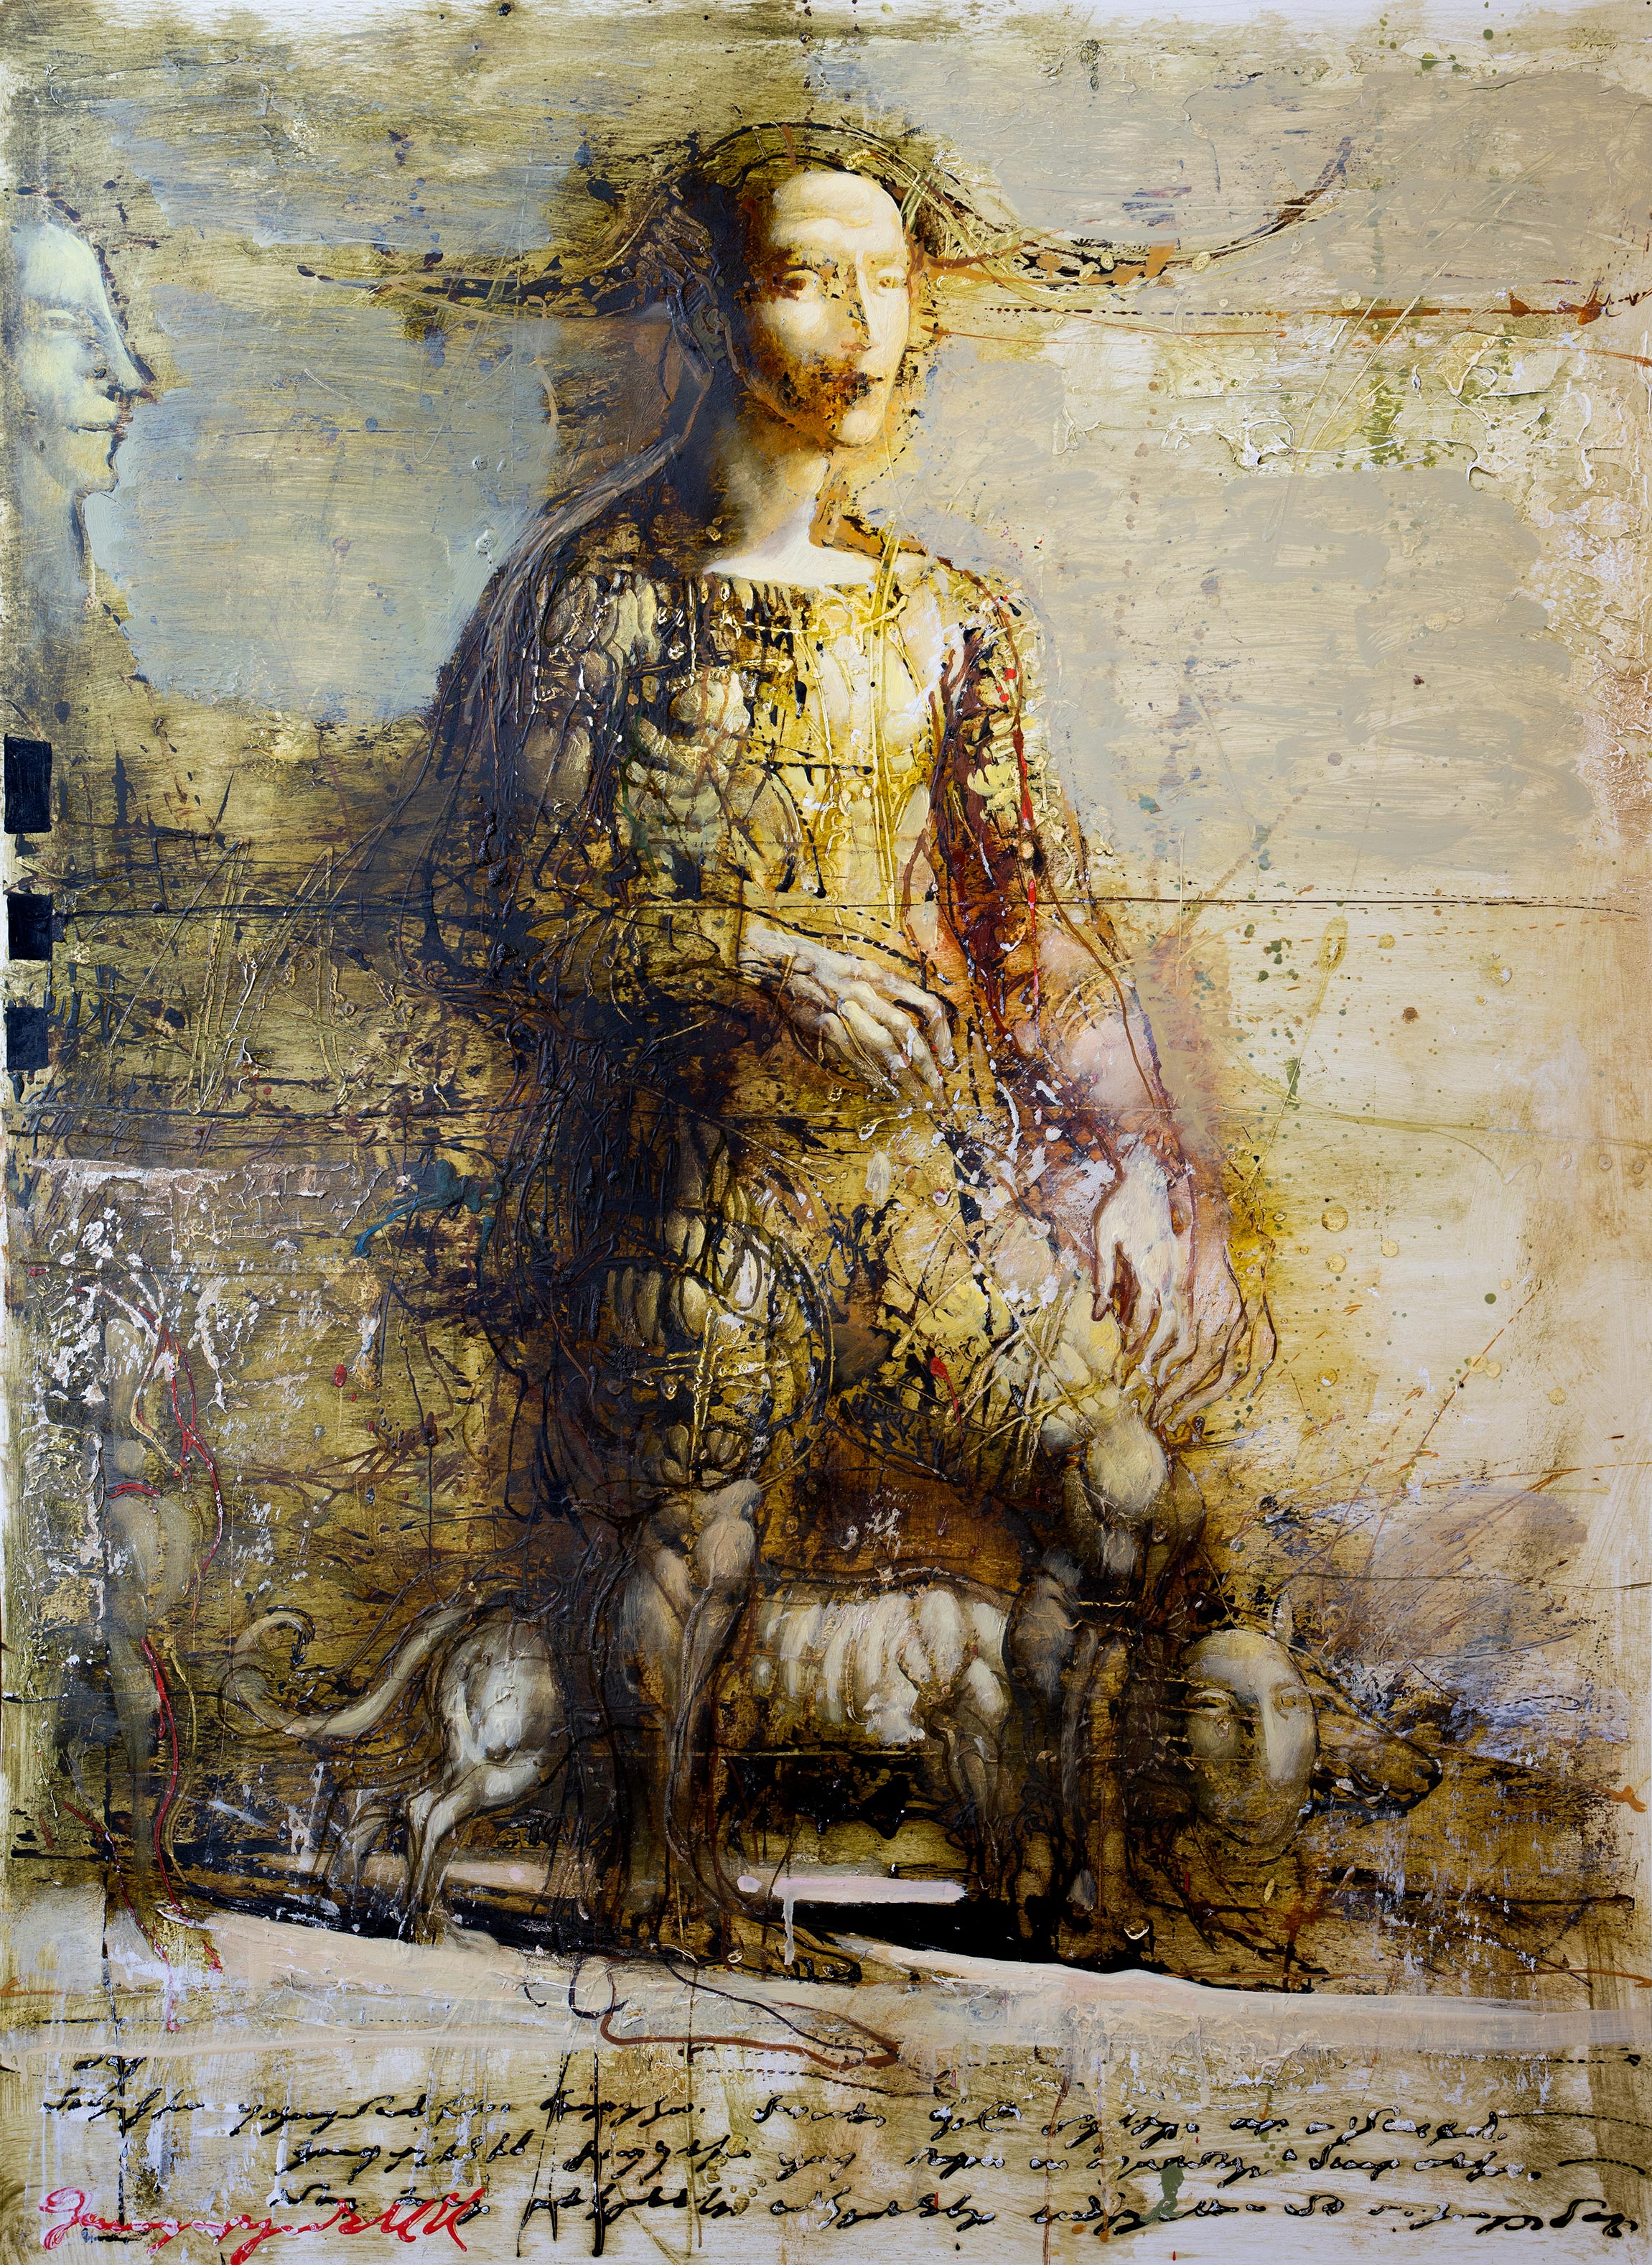 Man with the Dog - 1, Armen Gasparyan, Buy the painting Mixed media